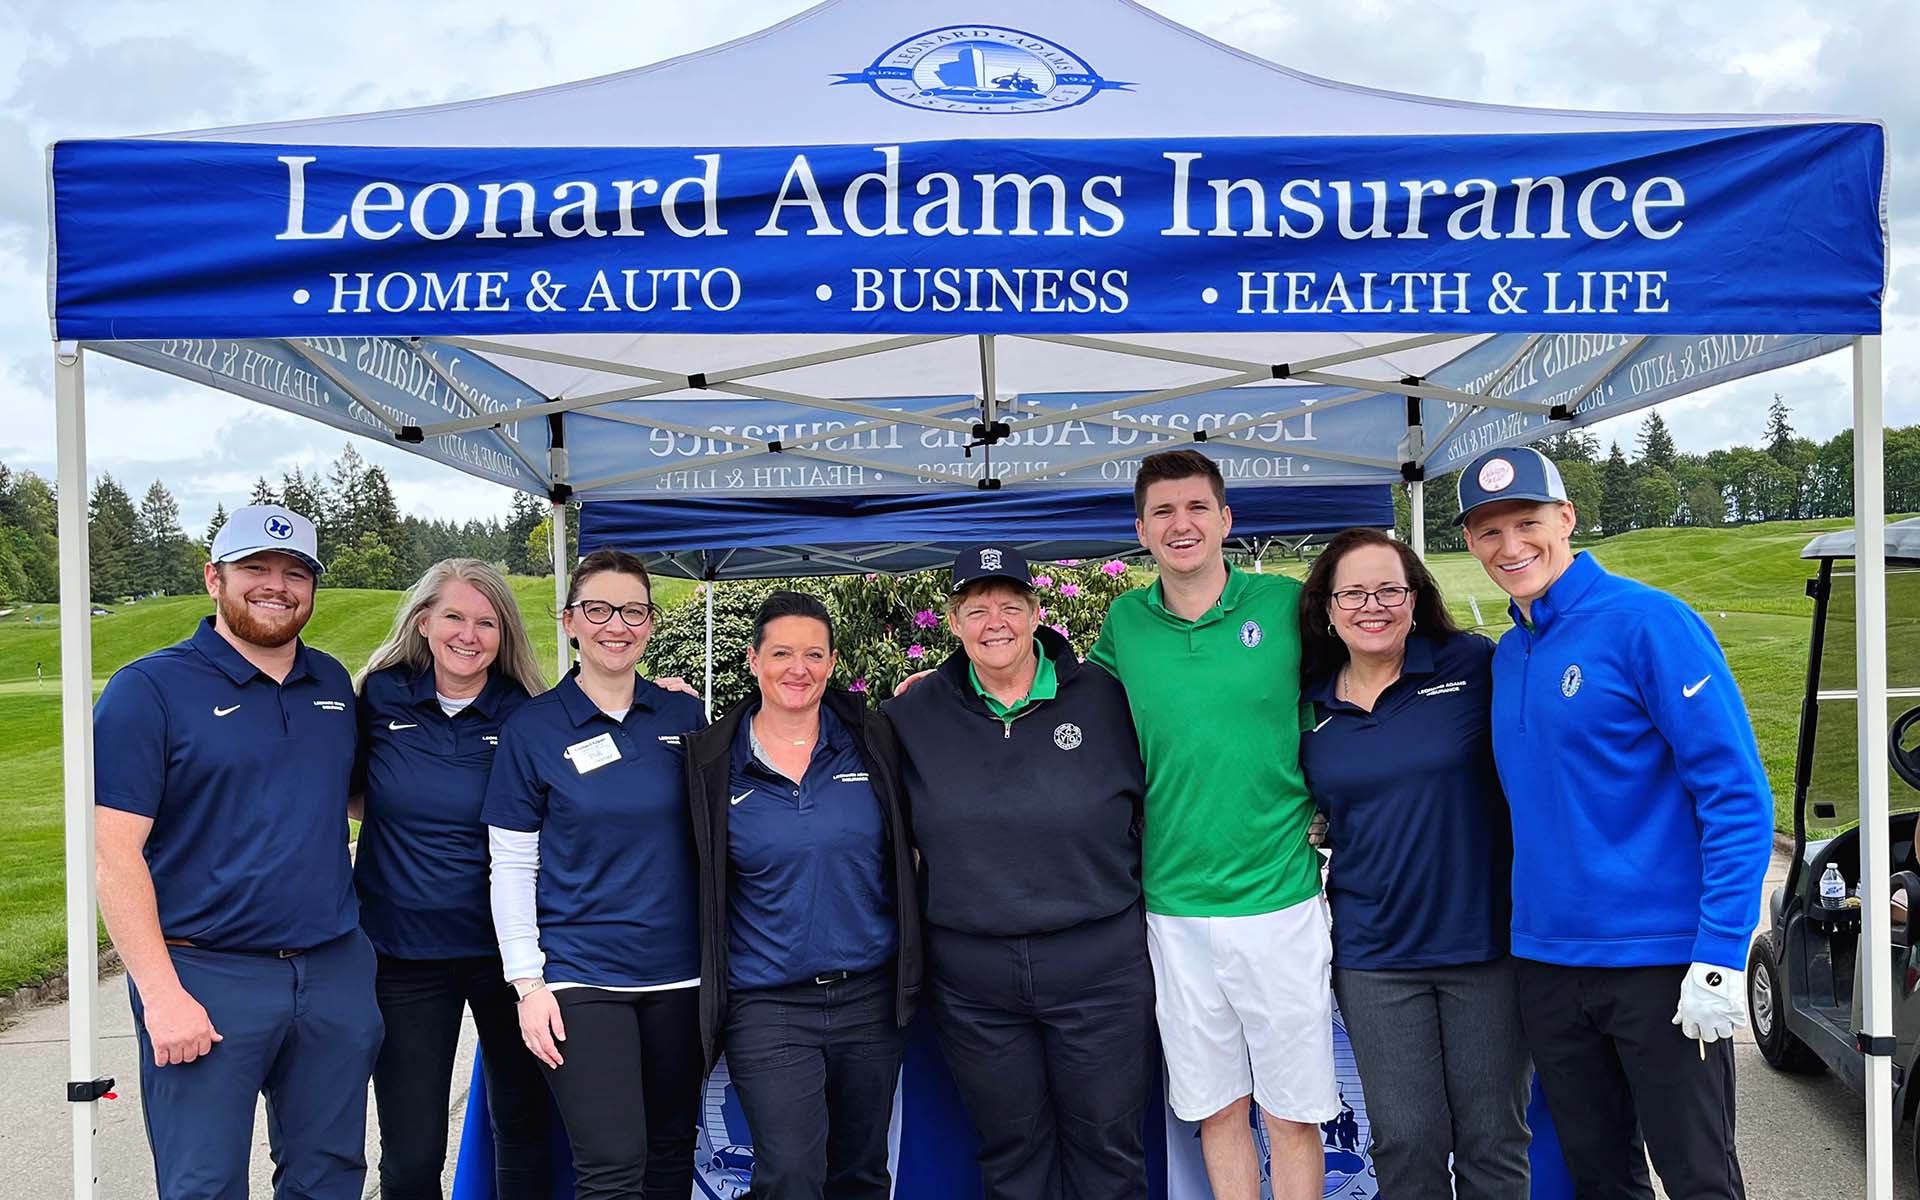 Careers - Leonard Adams Insurance Team Standing and Smiling Under a Canopy with Their Agency Name While Posing for a Photo